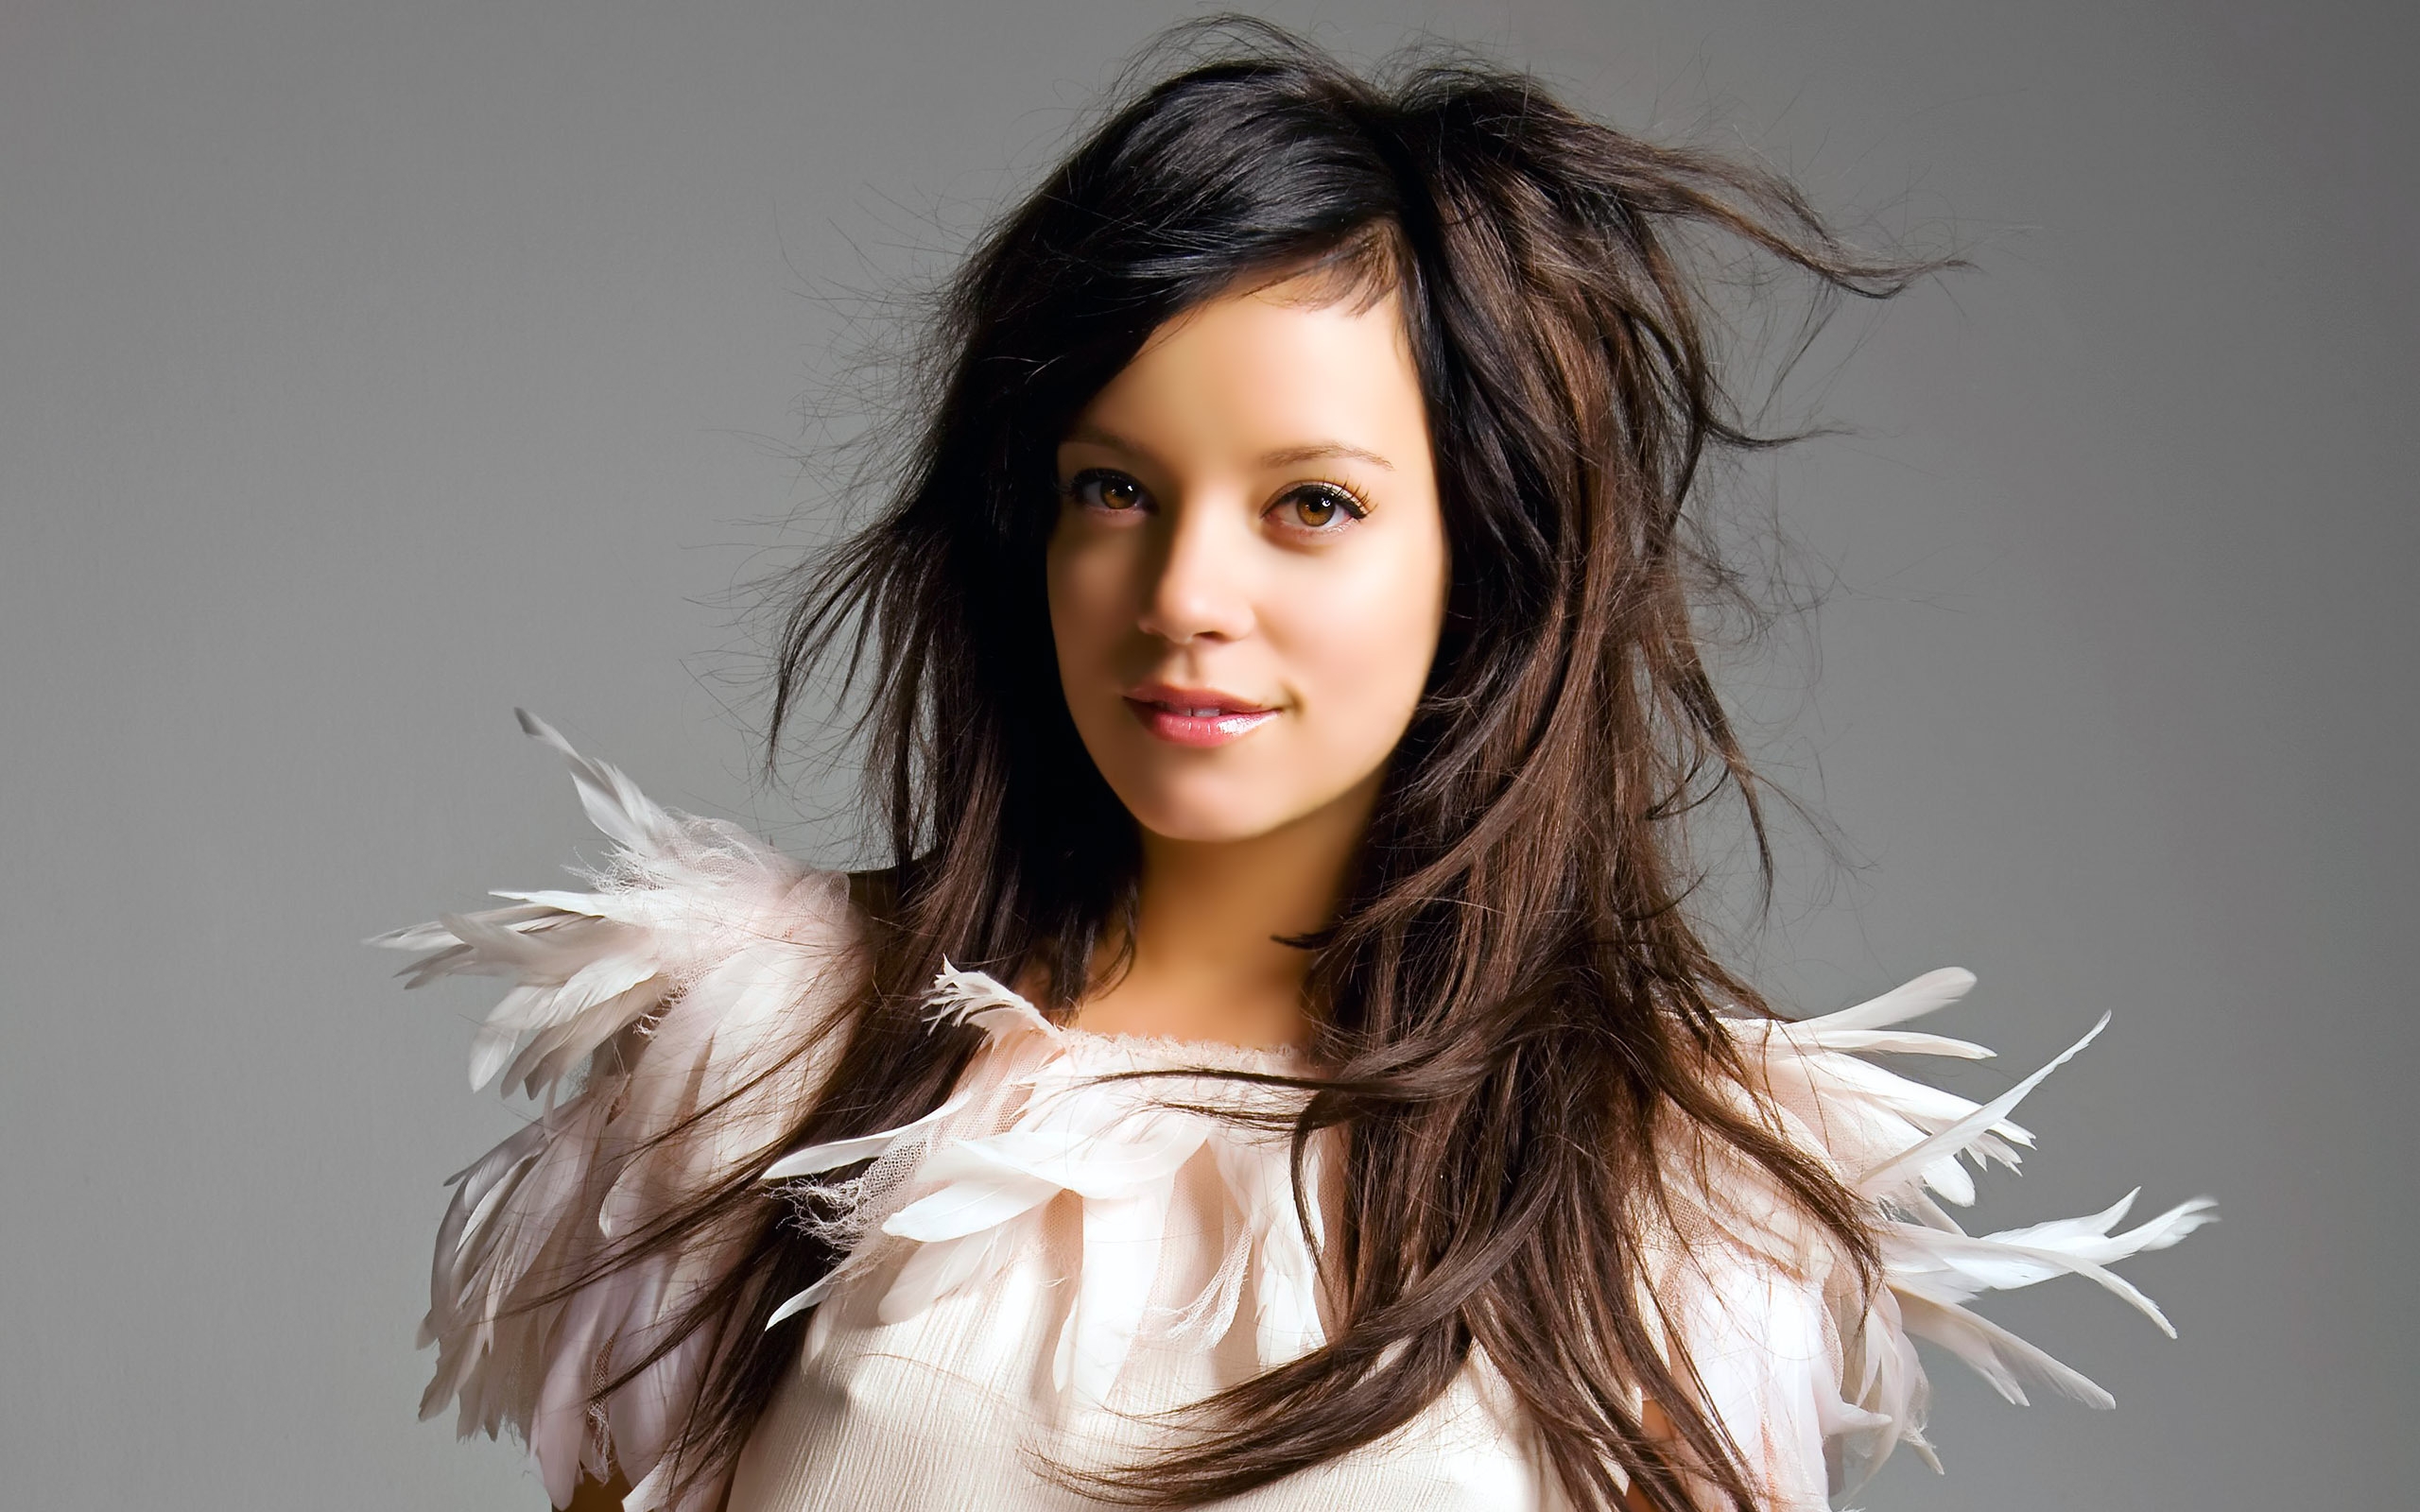 Superb Lily Allen for 2560 x 1600 widescreen resolution